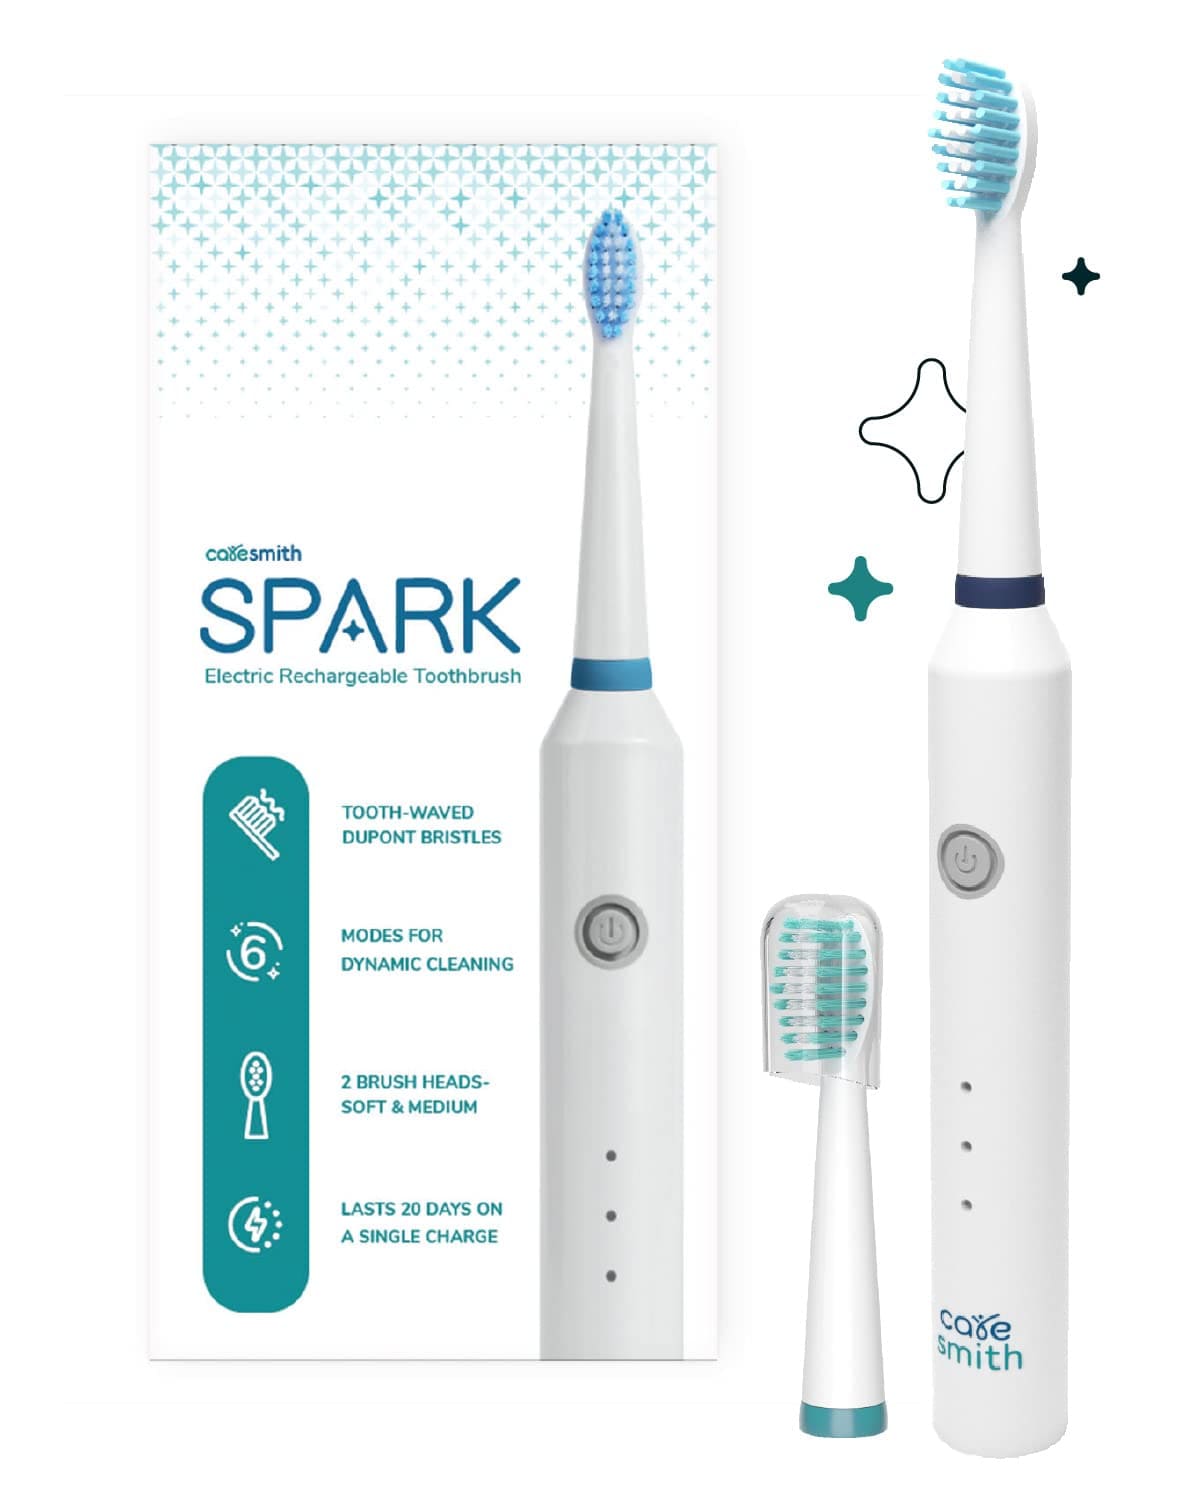 Caresmith Spark is low priced electric Toothbrush